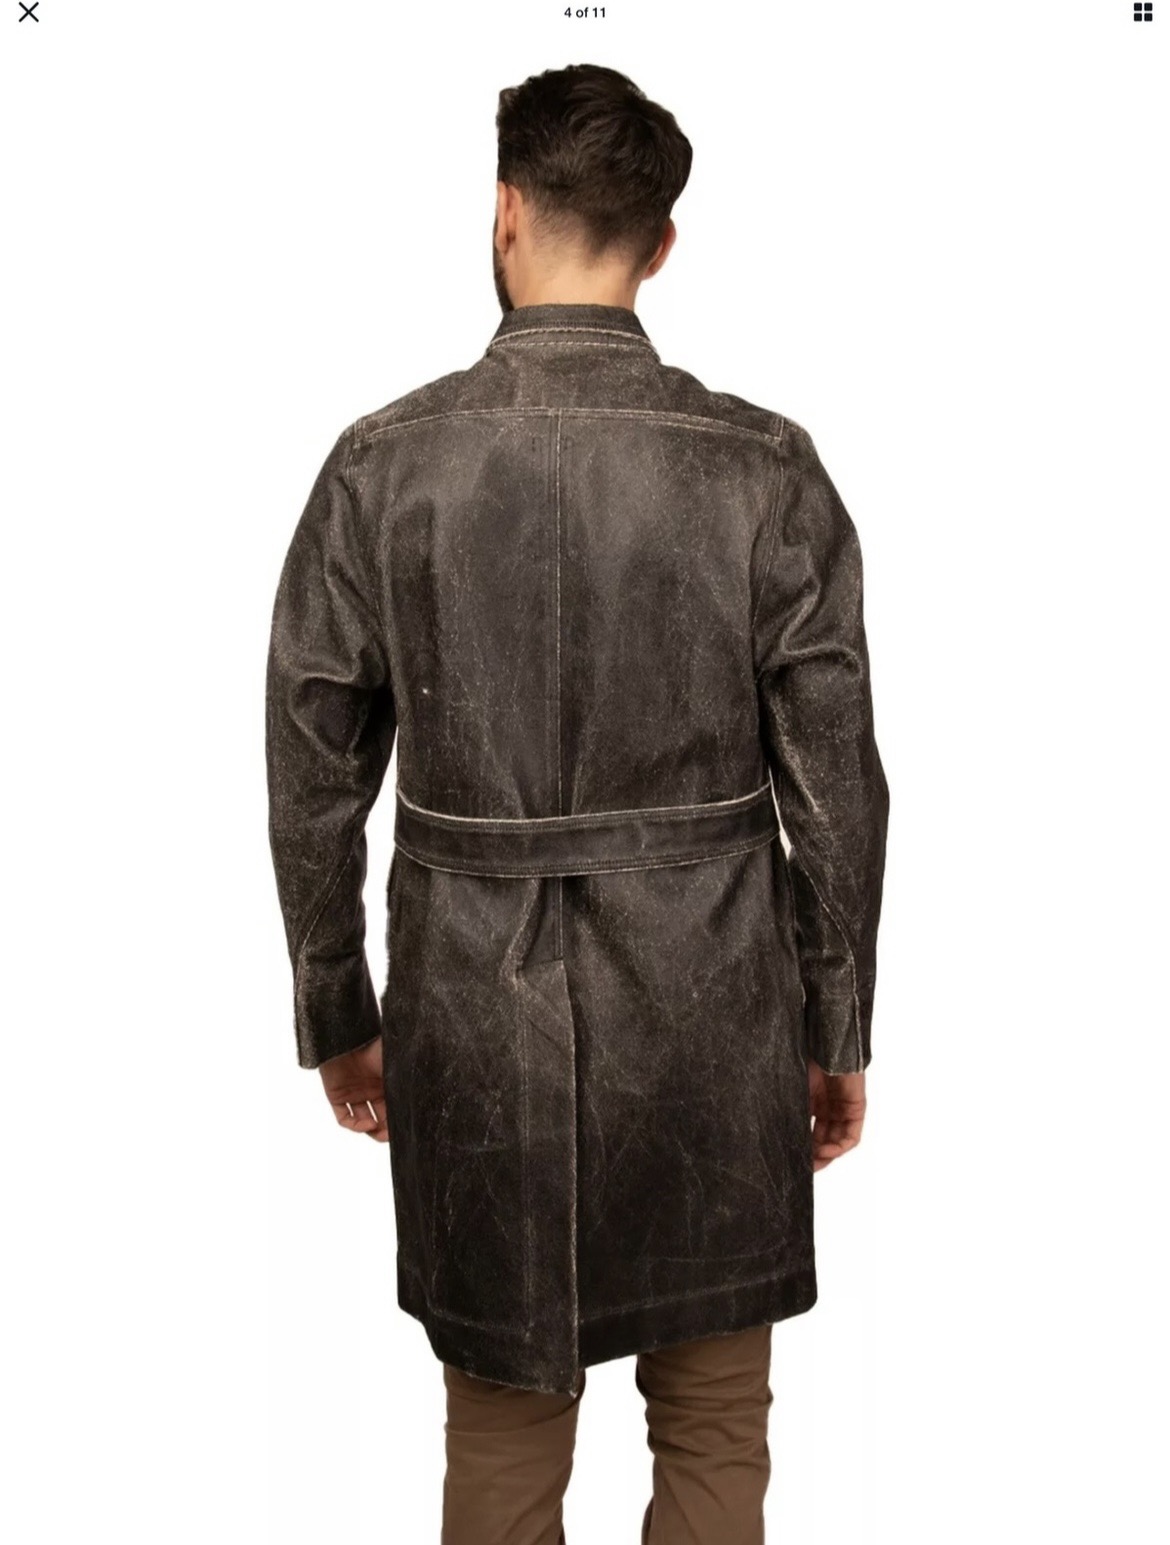 Rick Owens Canvas Trench Coat Waxed / Cracked DRKSHDW - Smal - 4